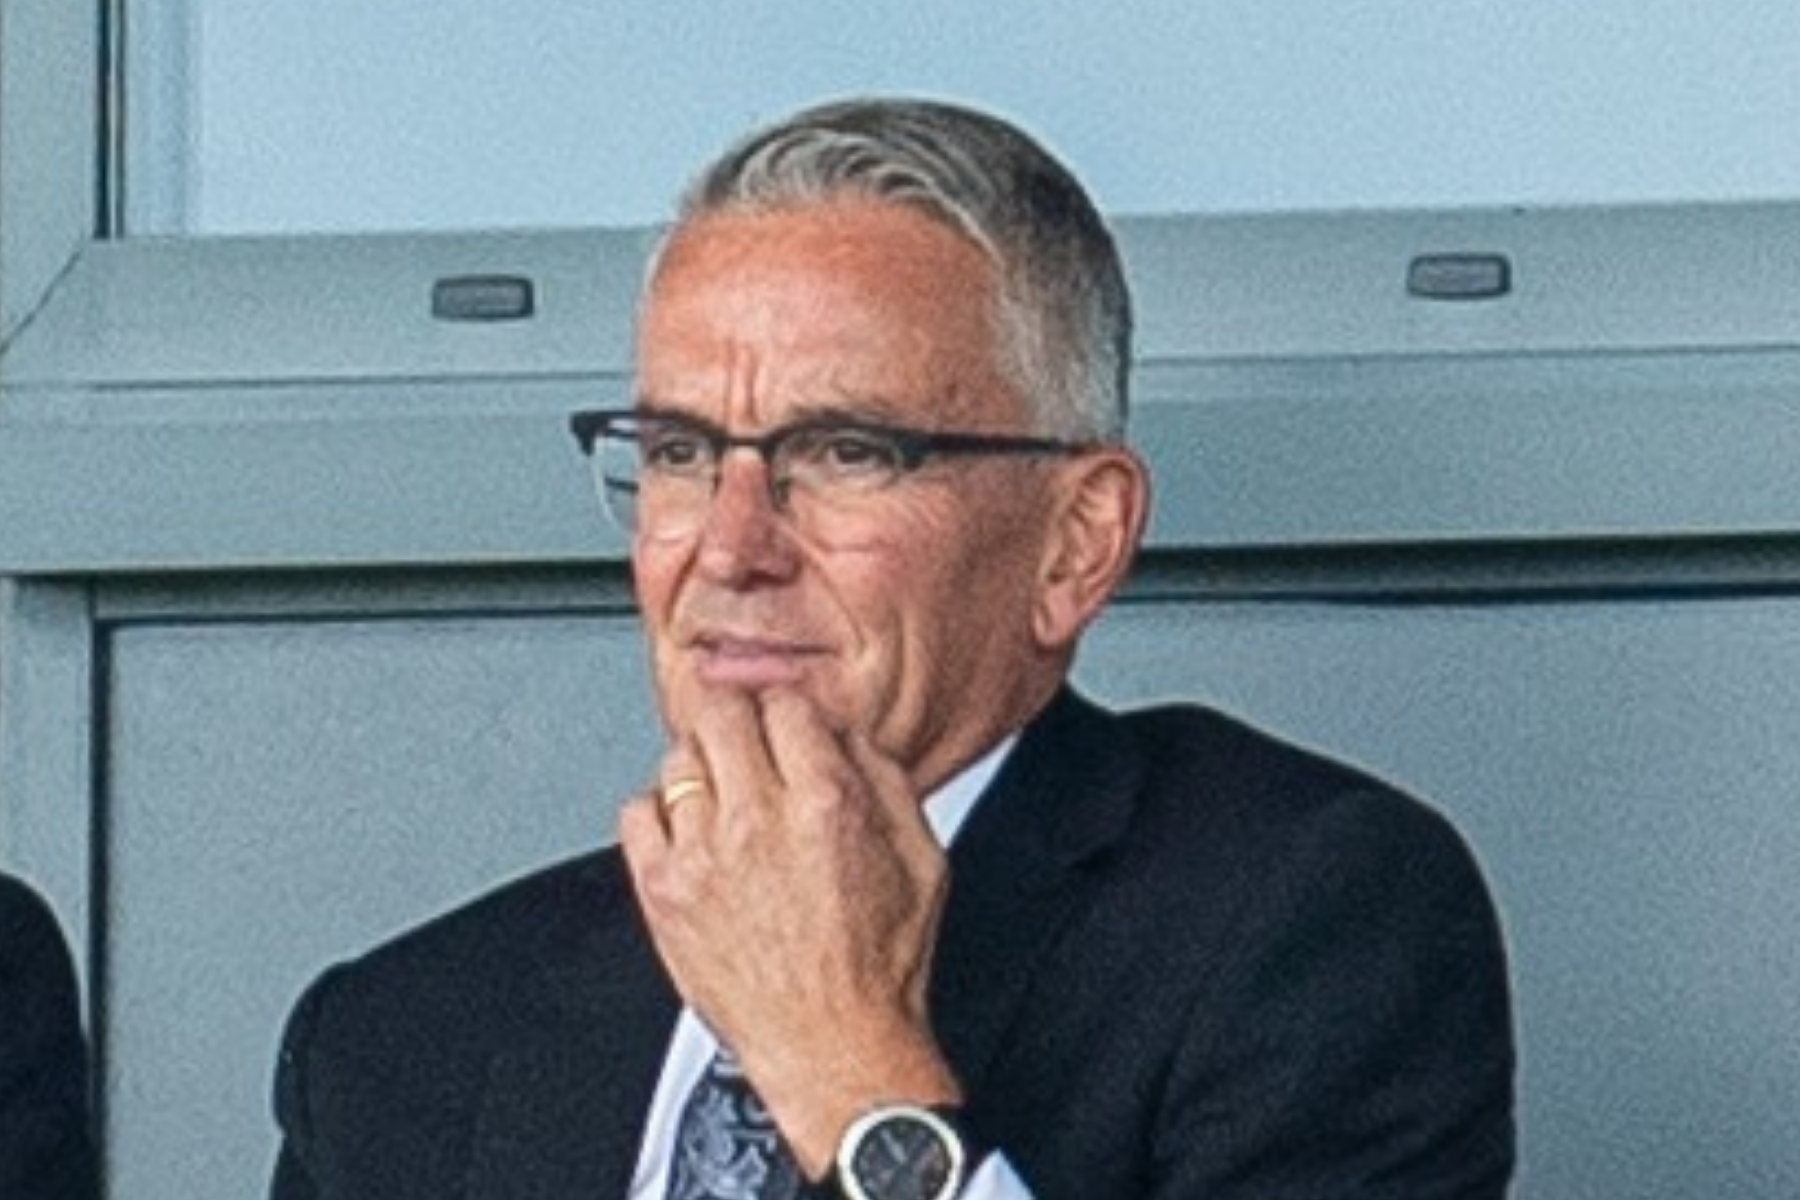 St Mirren chairman John Needham charged over Rangers comments